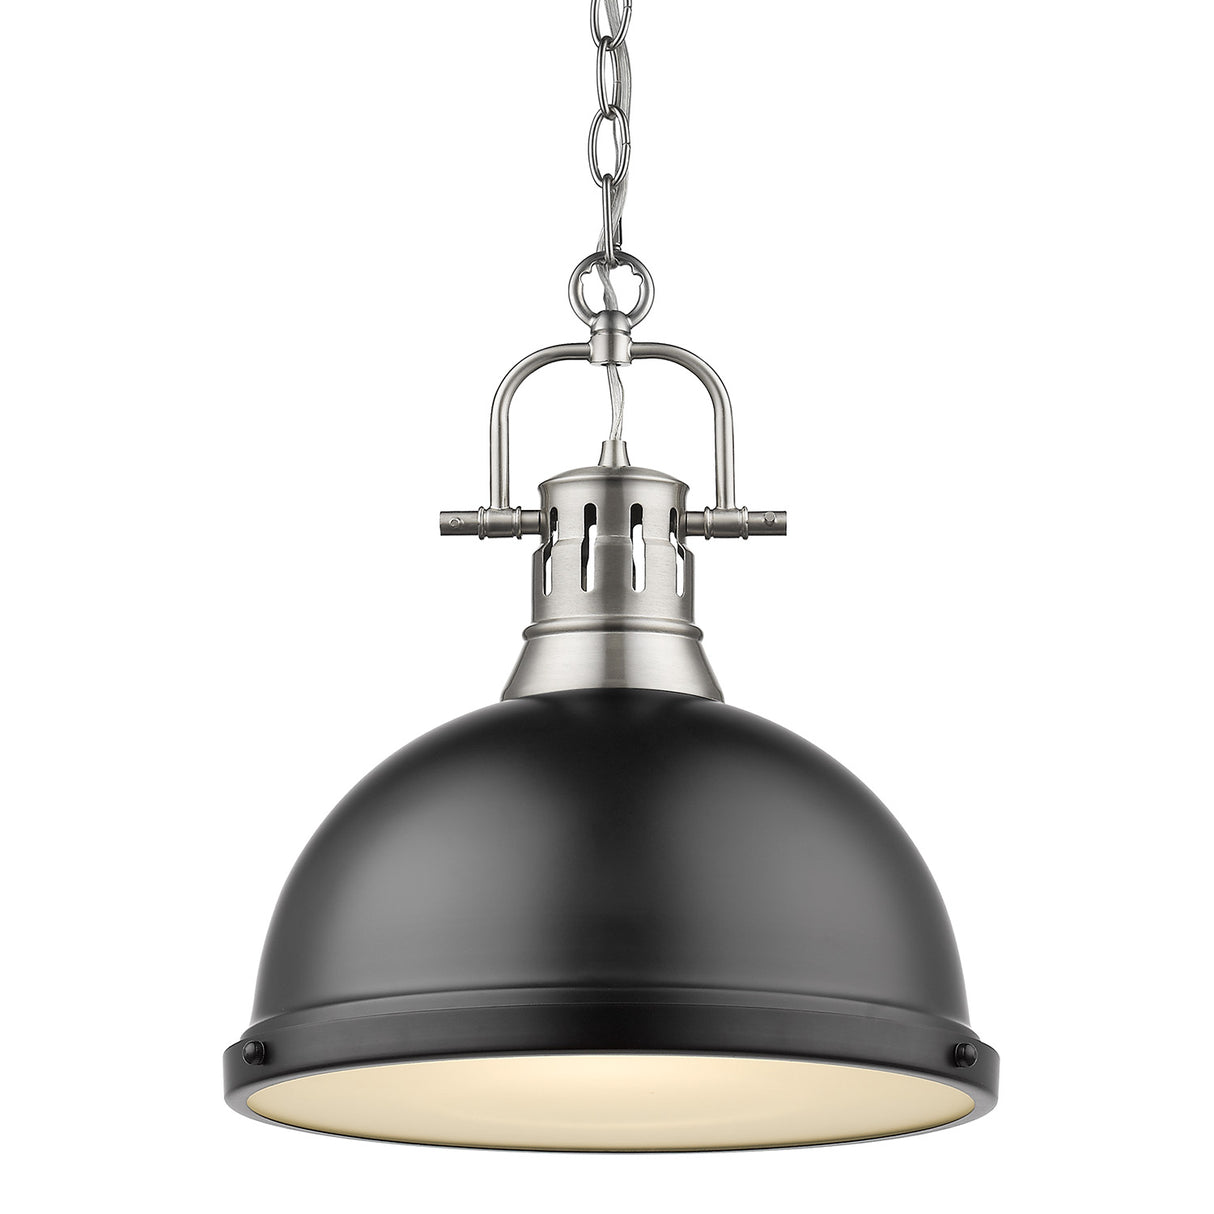 Duncan 1 Light Pendant with Chain in Pewter with a Matte Black Shade